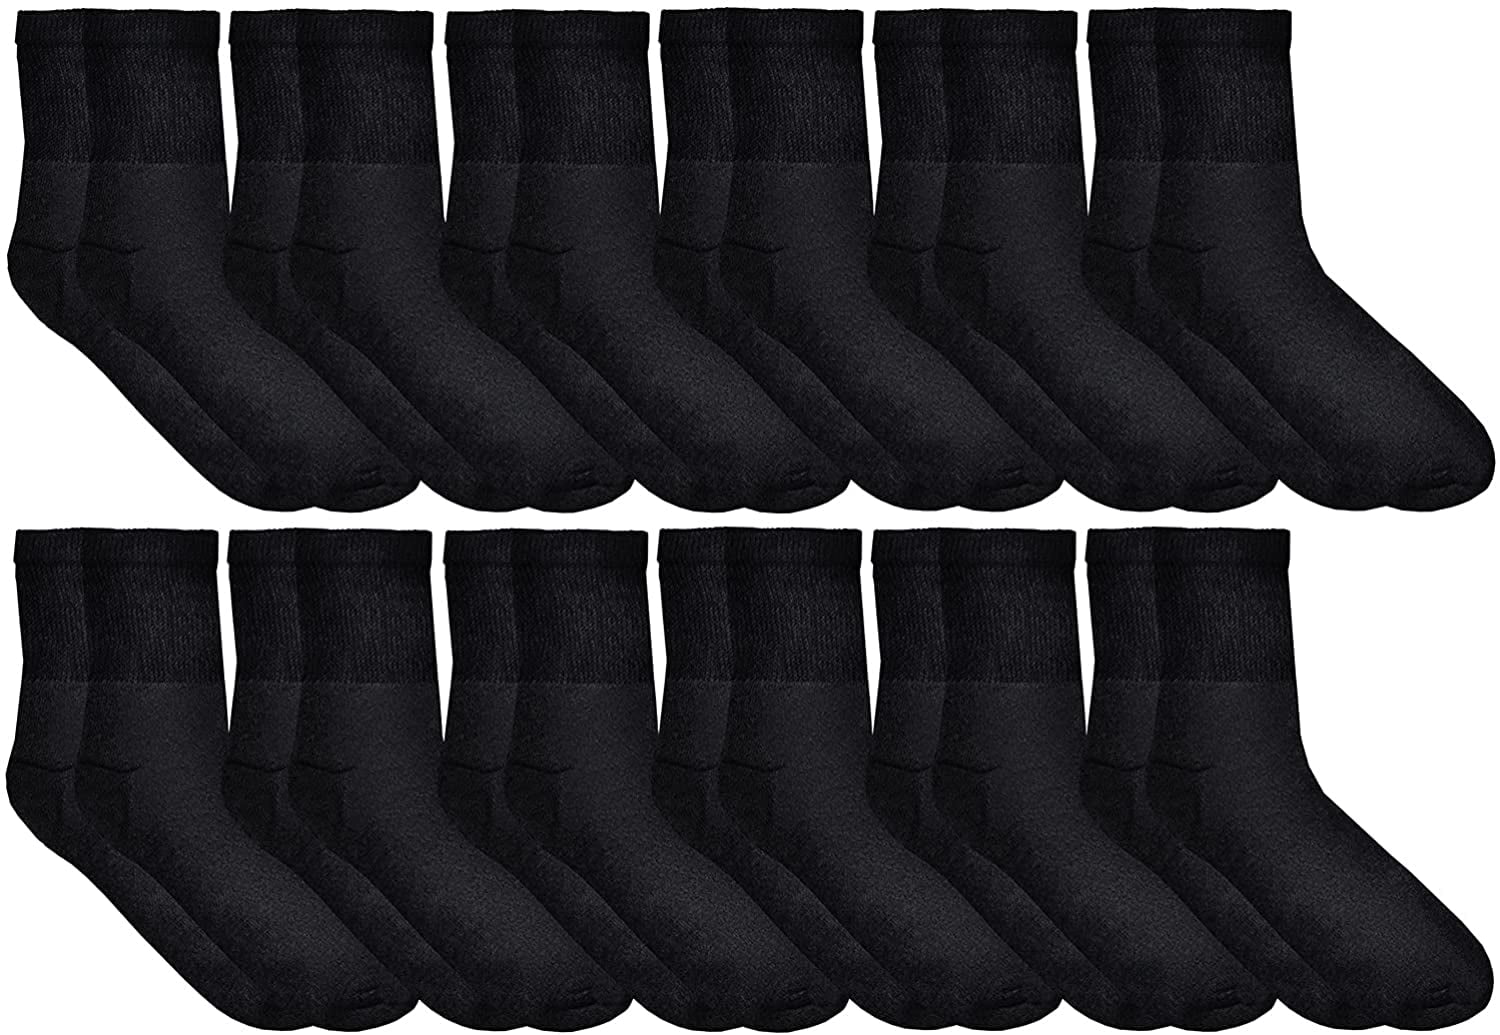 Value Pack of 12 Women's All Black Thin and Lightweight Low Cut Ankle Socks 